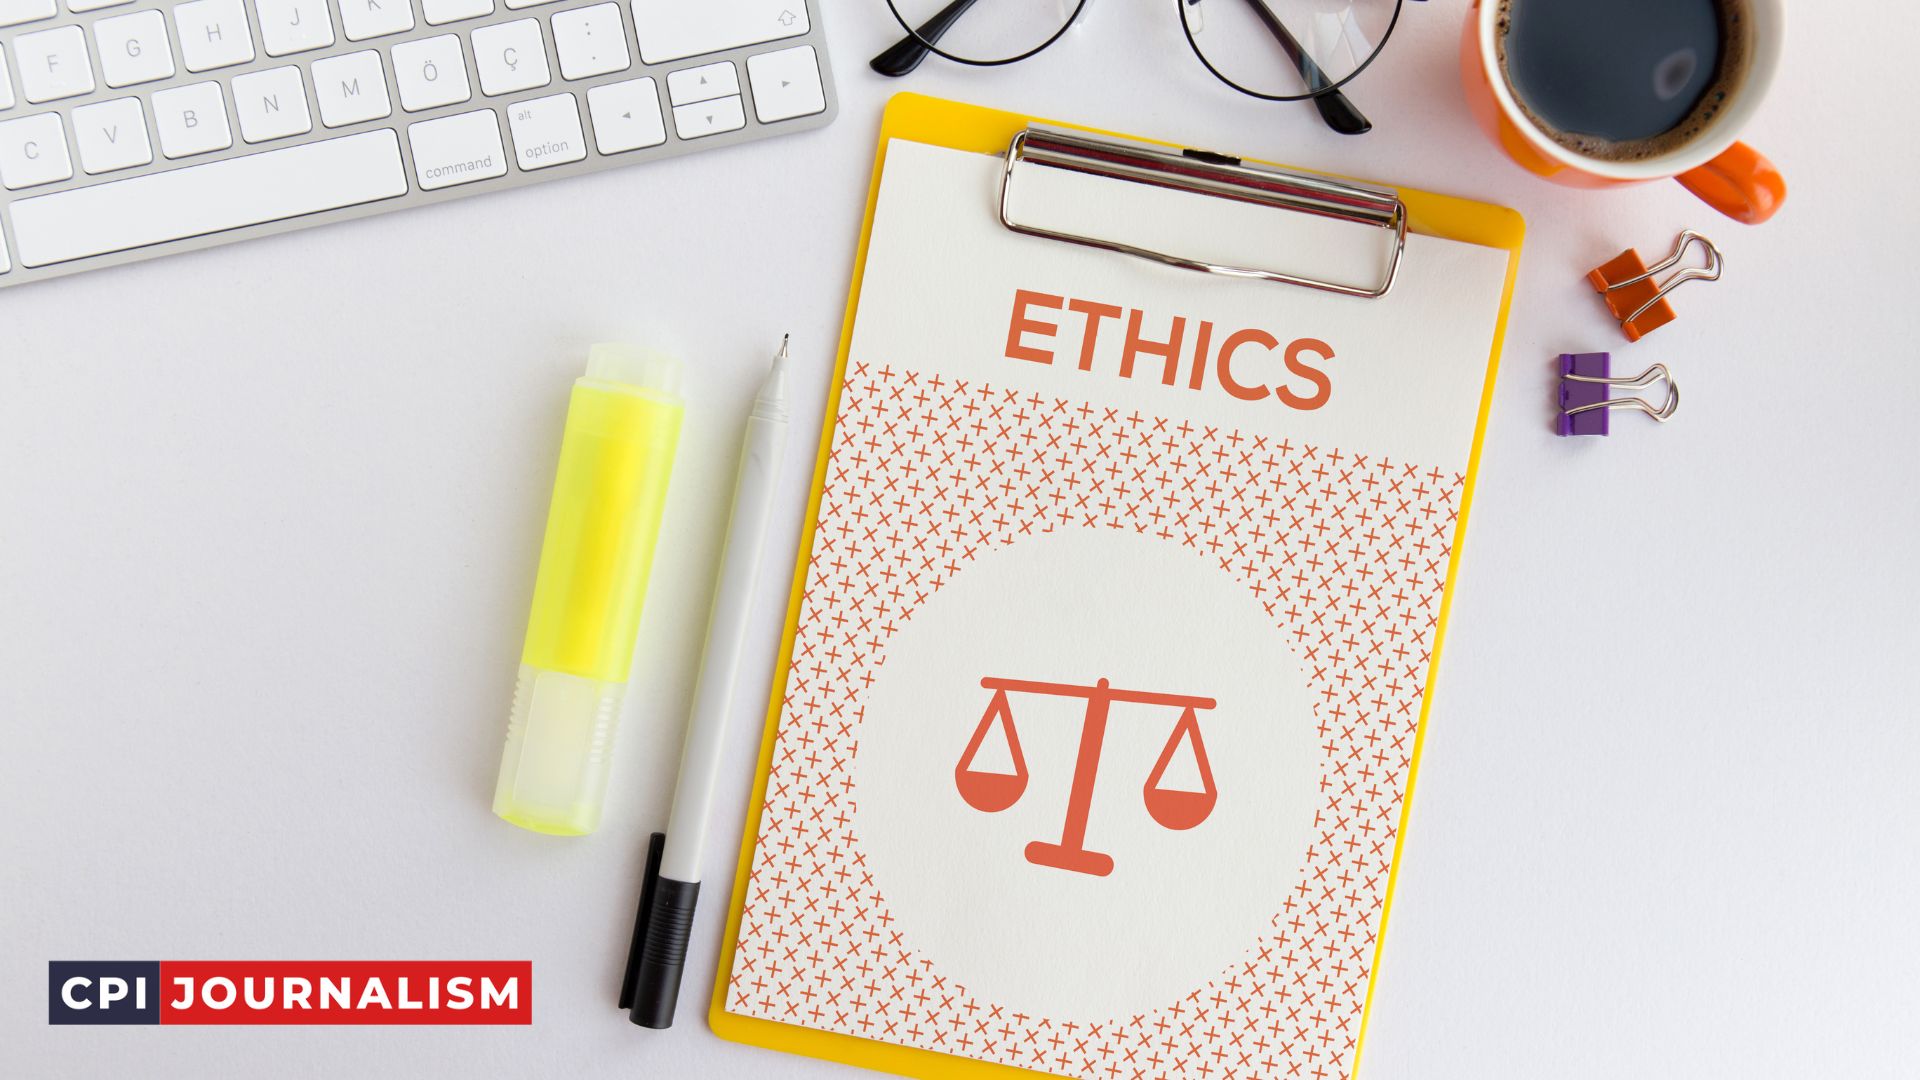 Ethical Considerations Do Broadcast Journalists Need To Keep In Mind